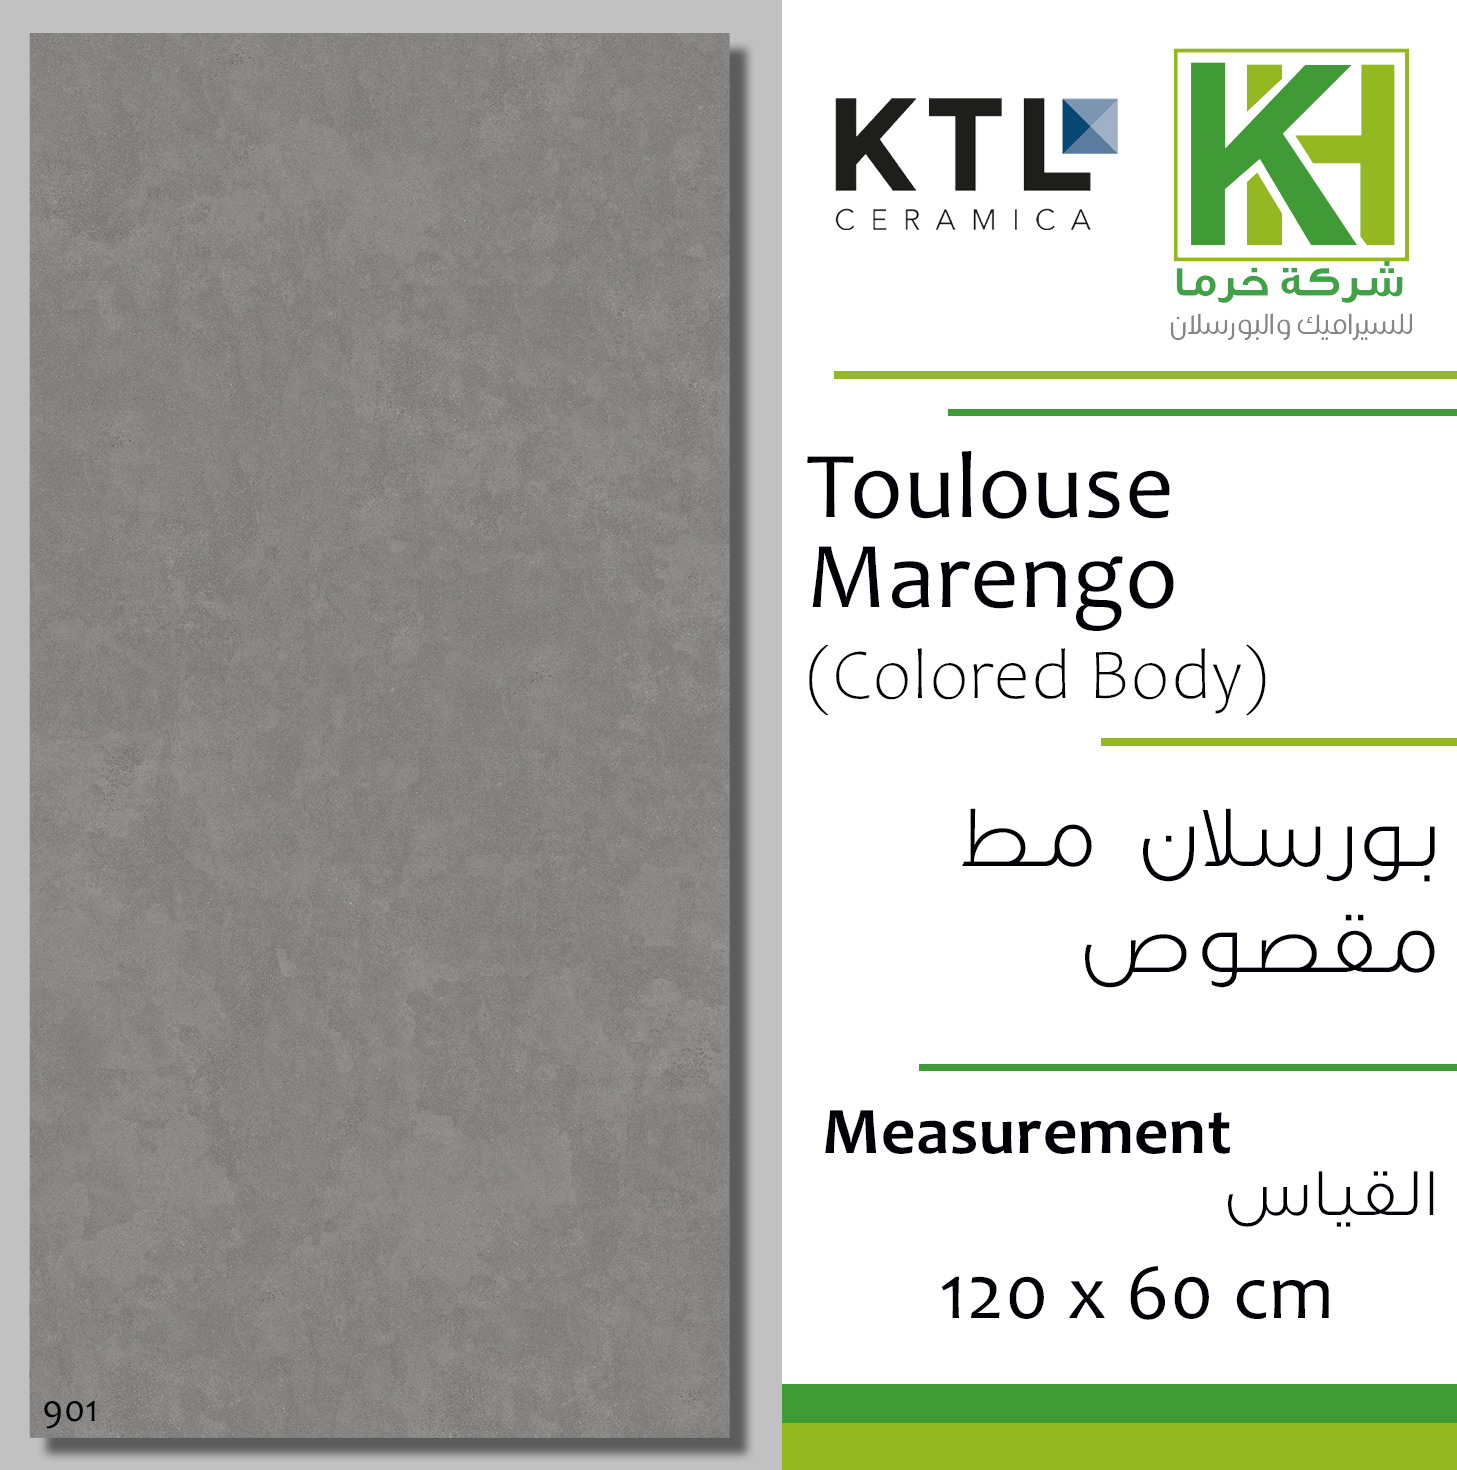 Picture of Spanish Porcelain tile 60x120cm Toulouse Marengo (Colored Body)